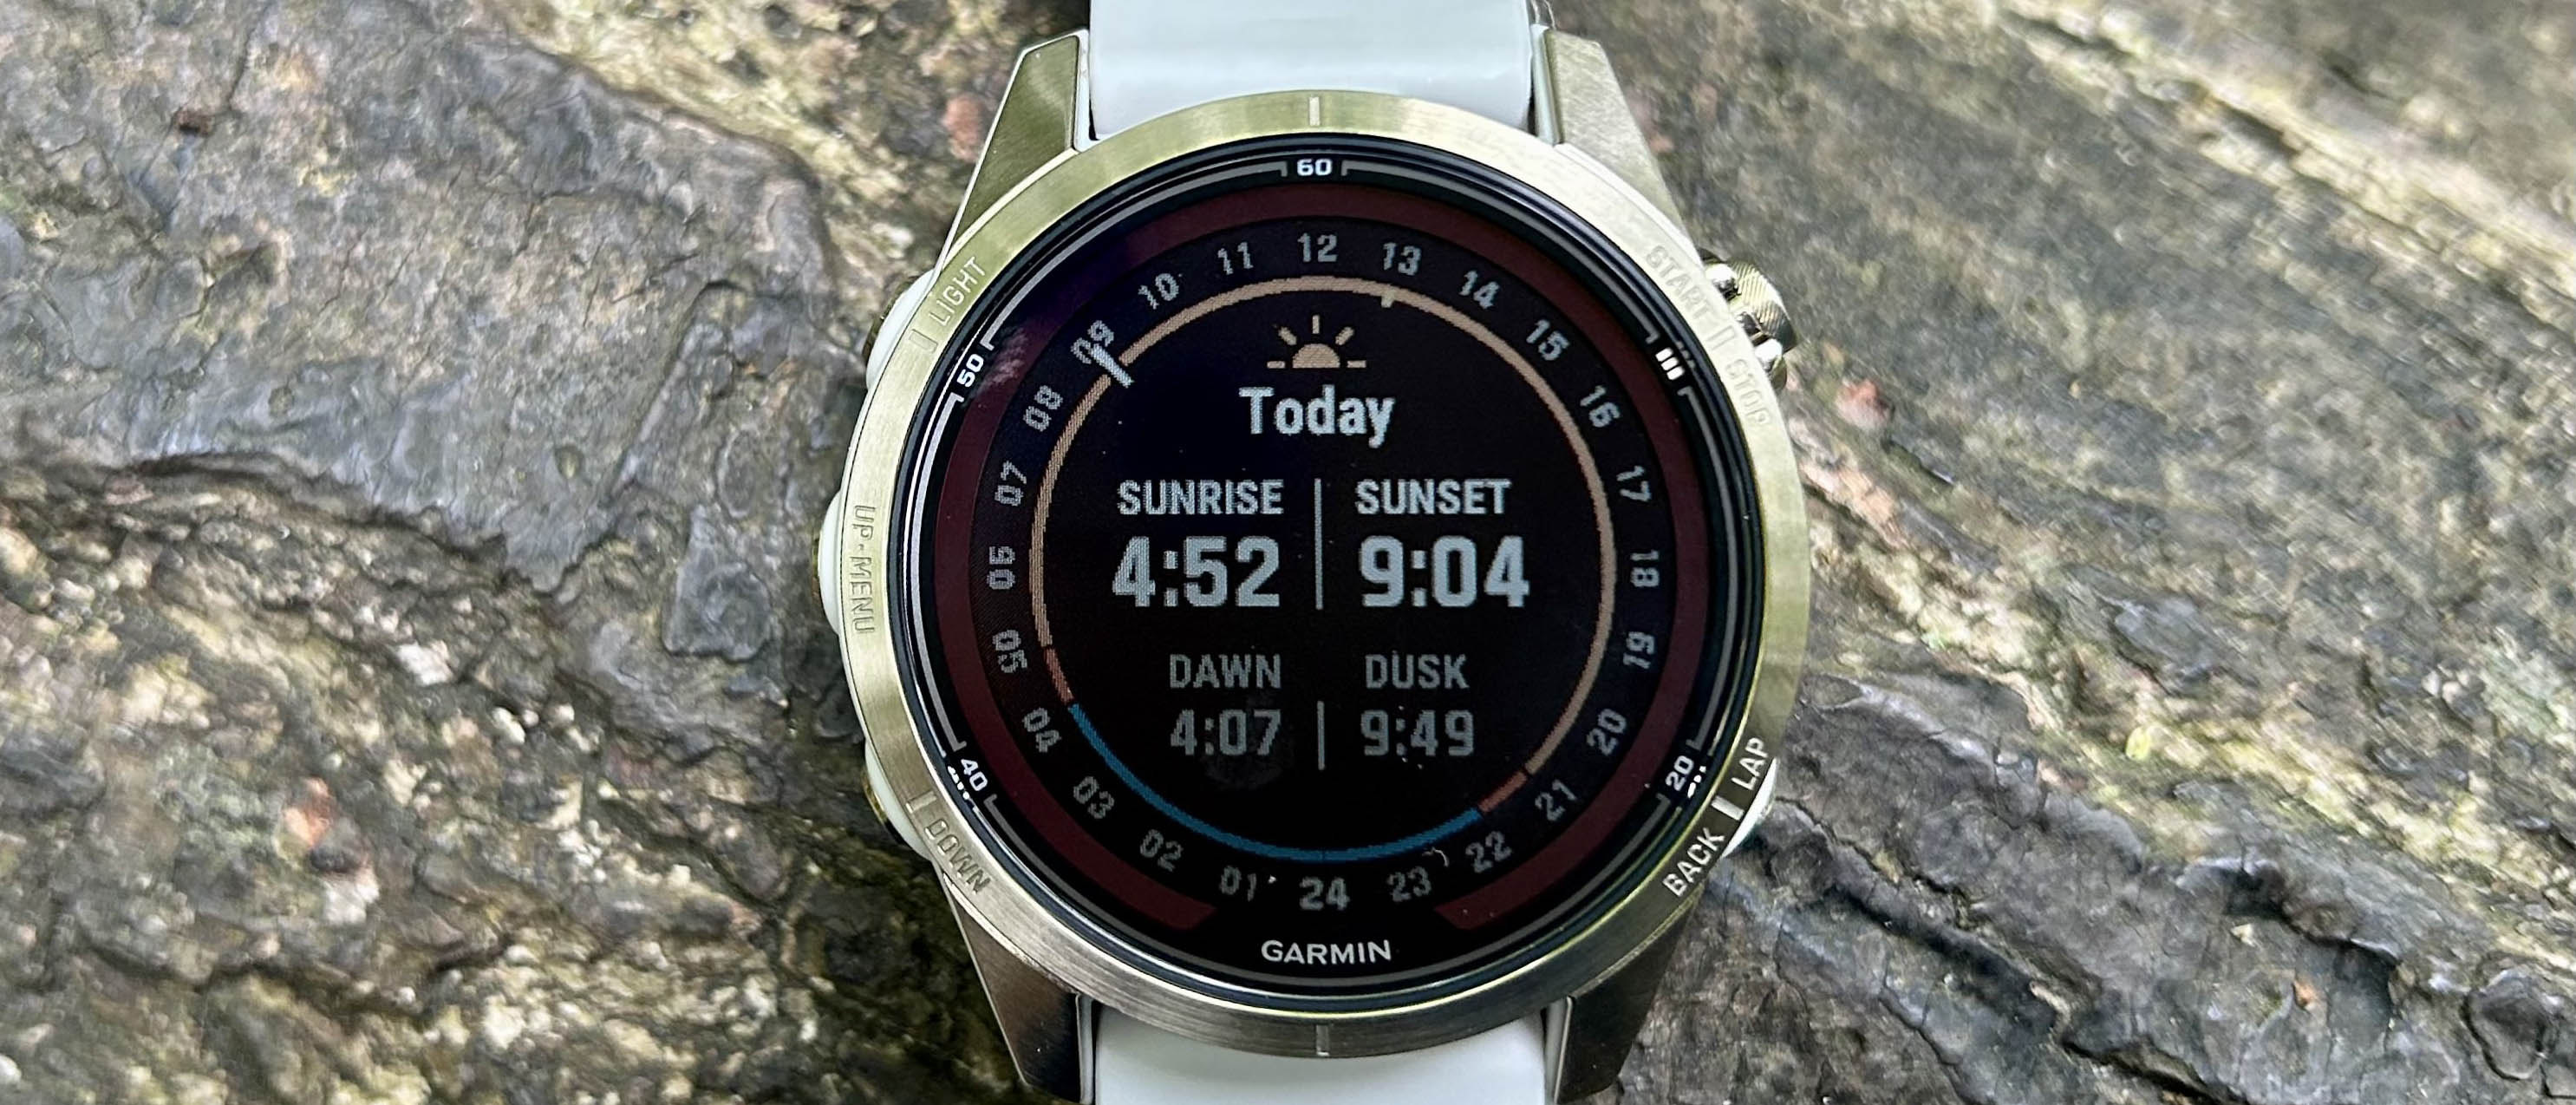 Garmin Fenix 7s Review  Comparing to 6s, Enduro and Others